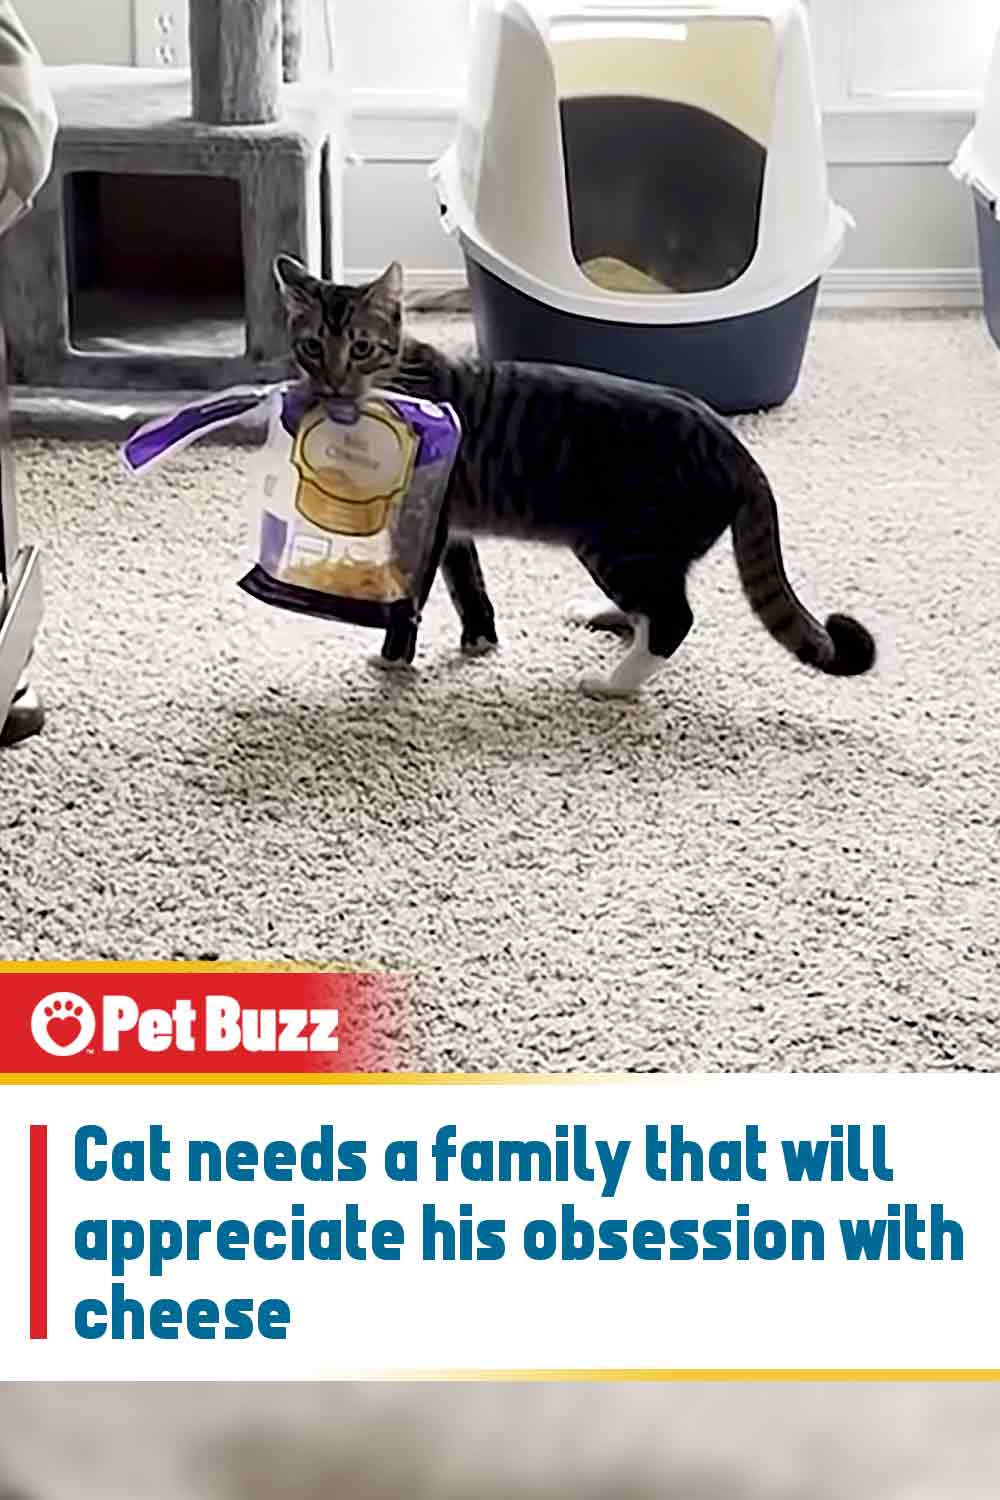 Cat needs a family that will appreciate his obsession with cheese